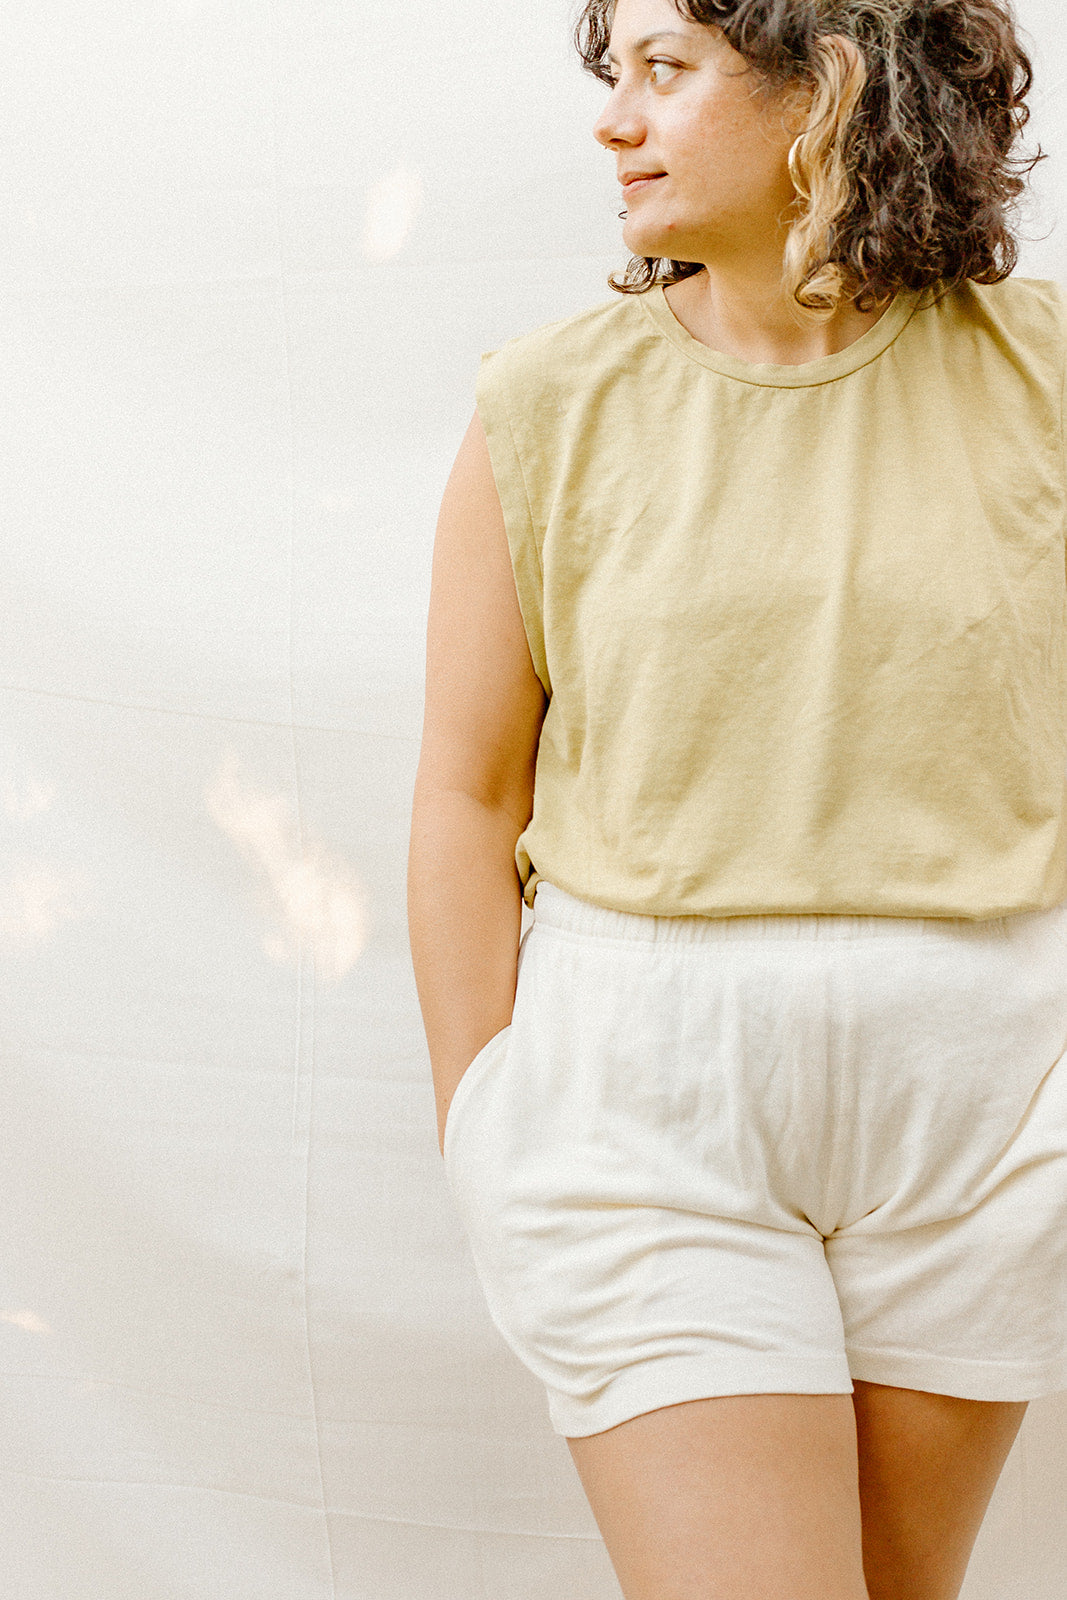 Jungmaven Sun Shorts sold at Thread Spun. Designed for walking on sunshine while sipping dewdrops. A classic jersey short that makes every season feel like summer lounging.